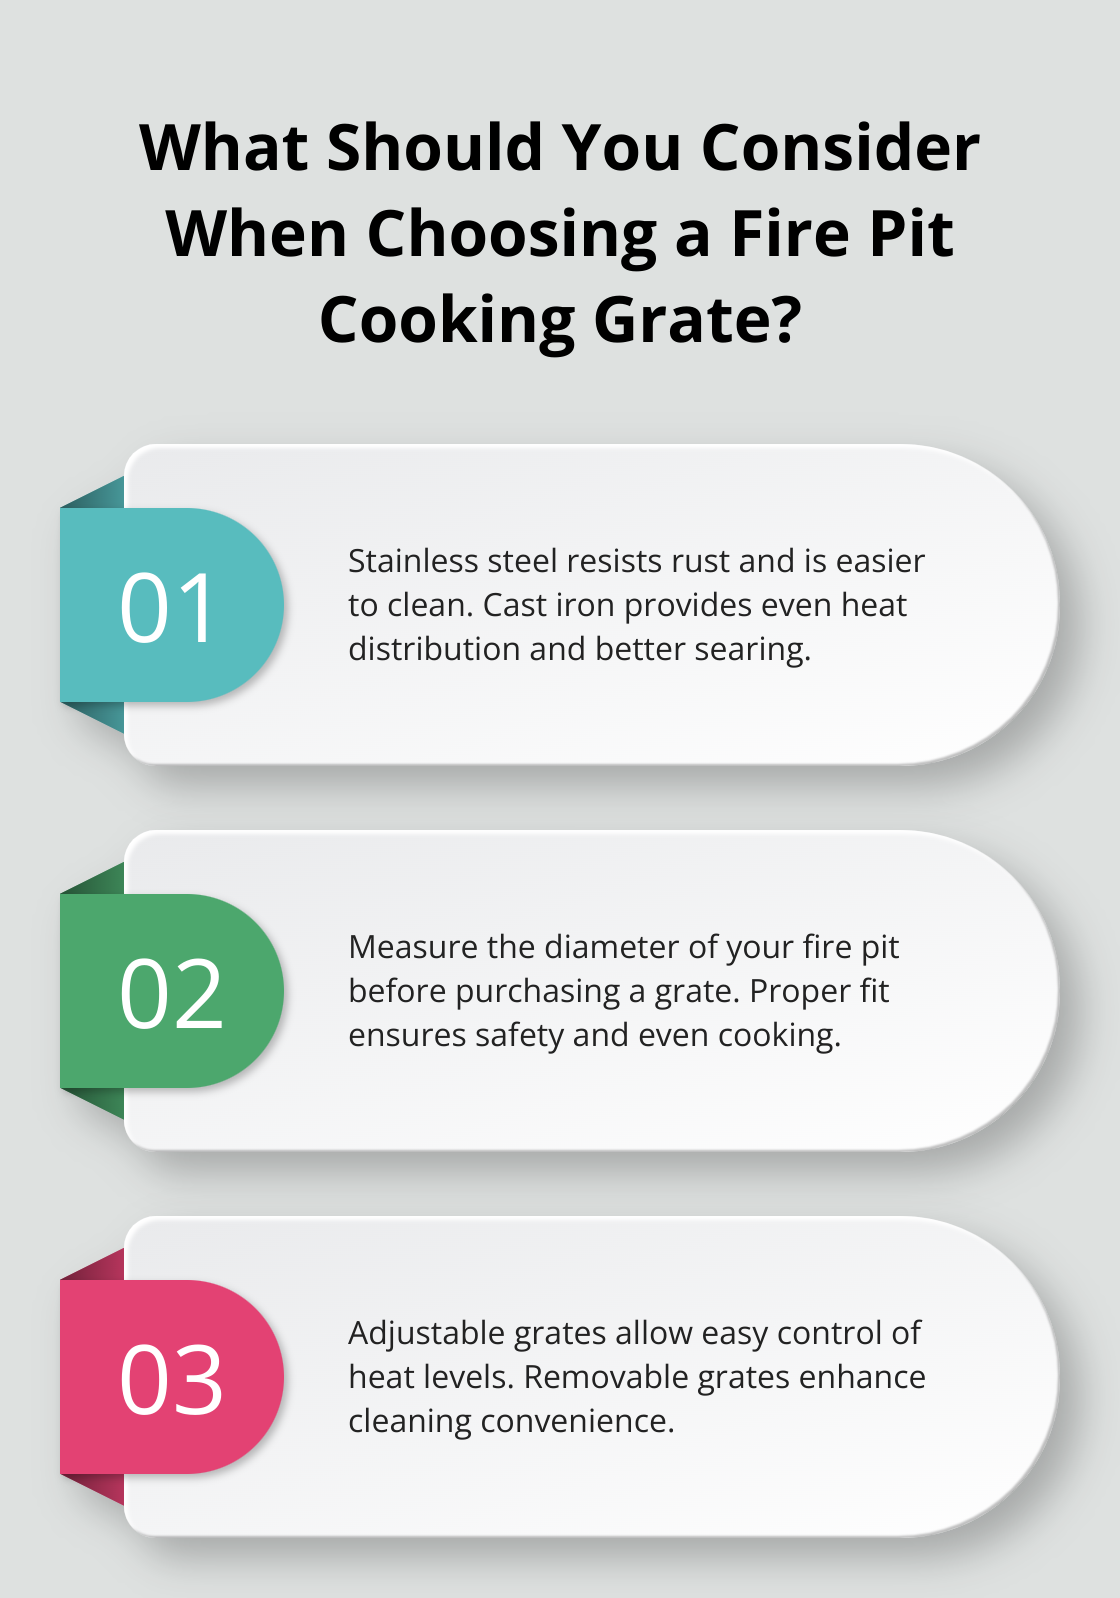 Fact - What Should You Consider When Choosing a Fire Pit Cooking Grate?